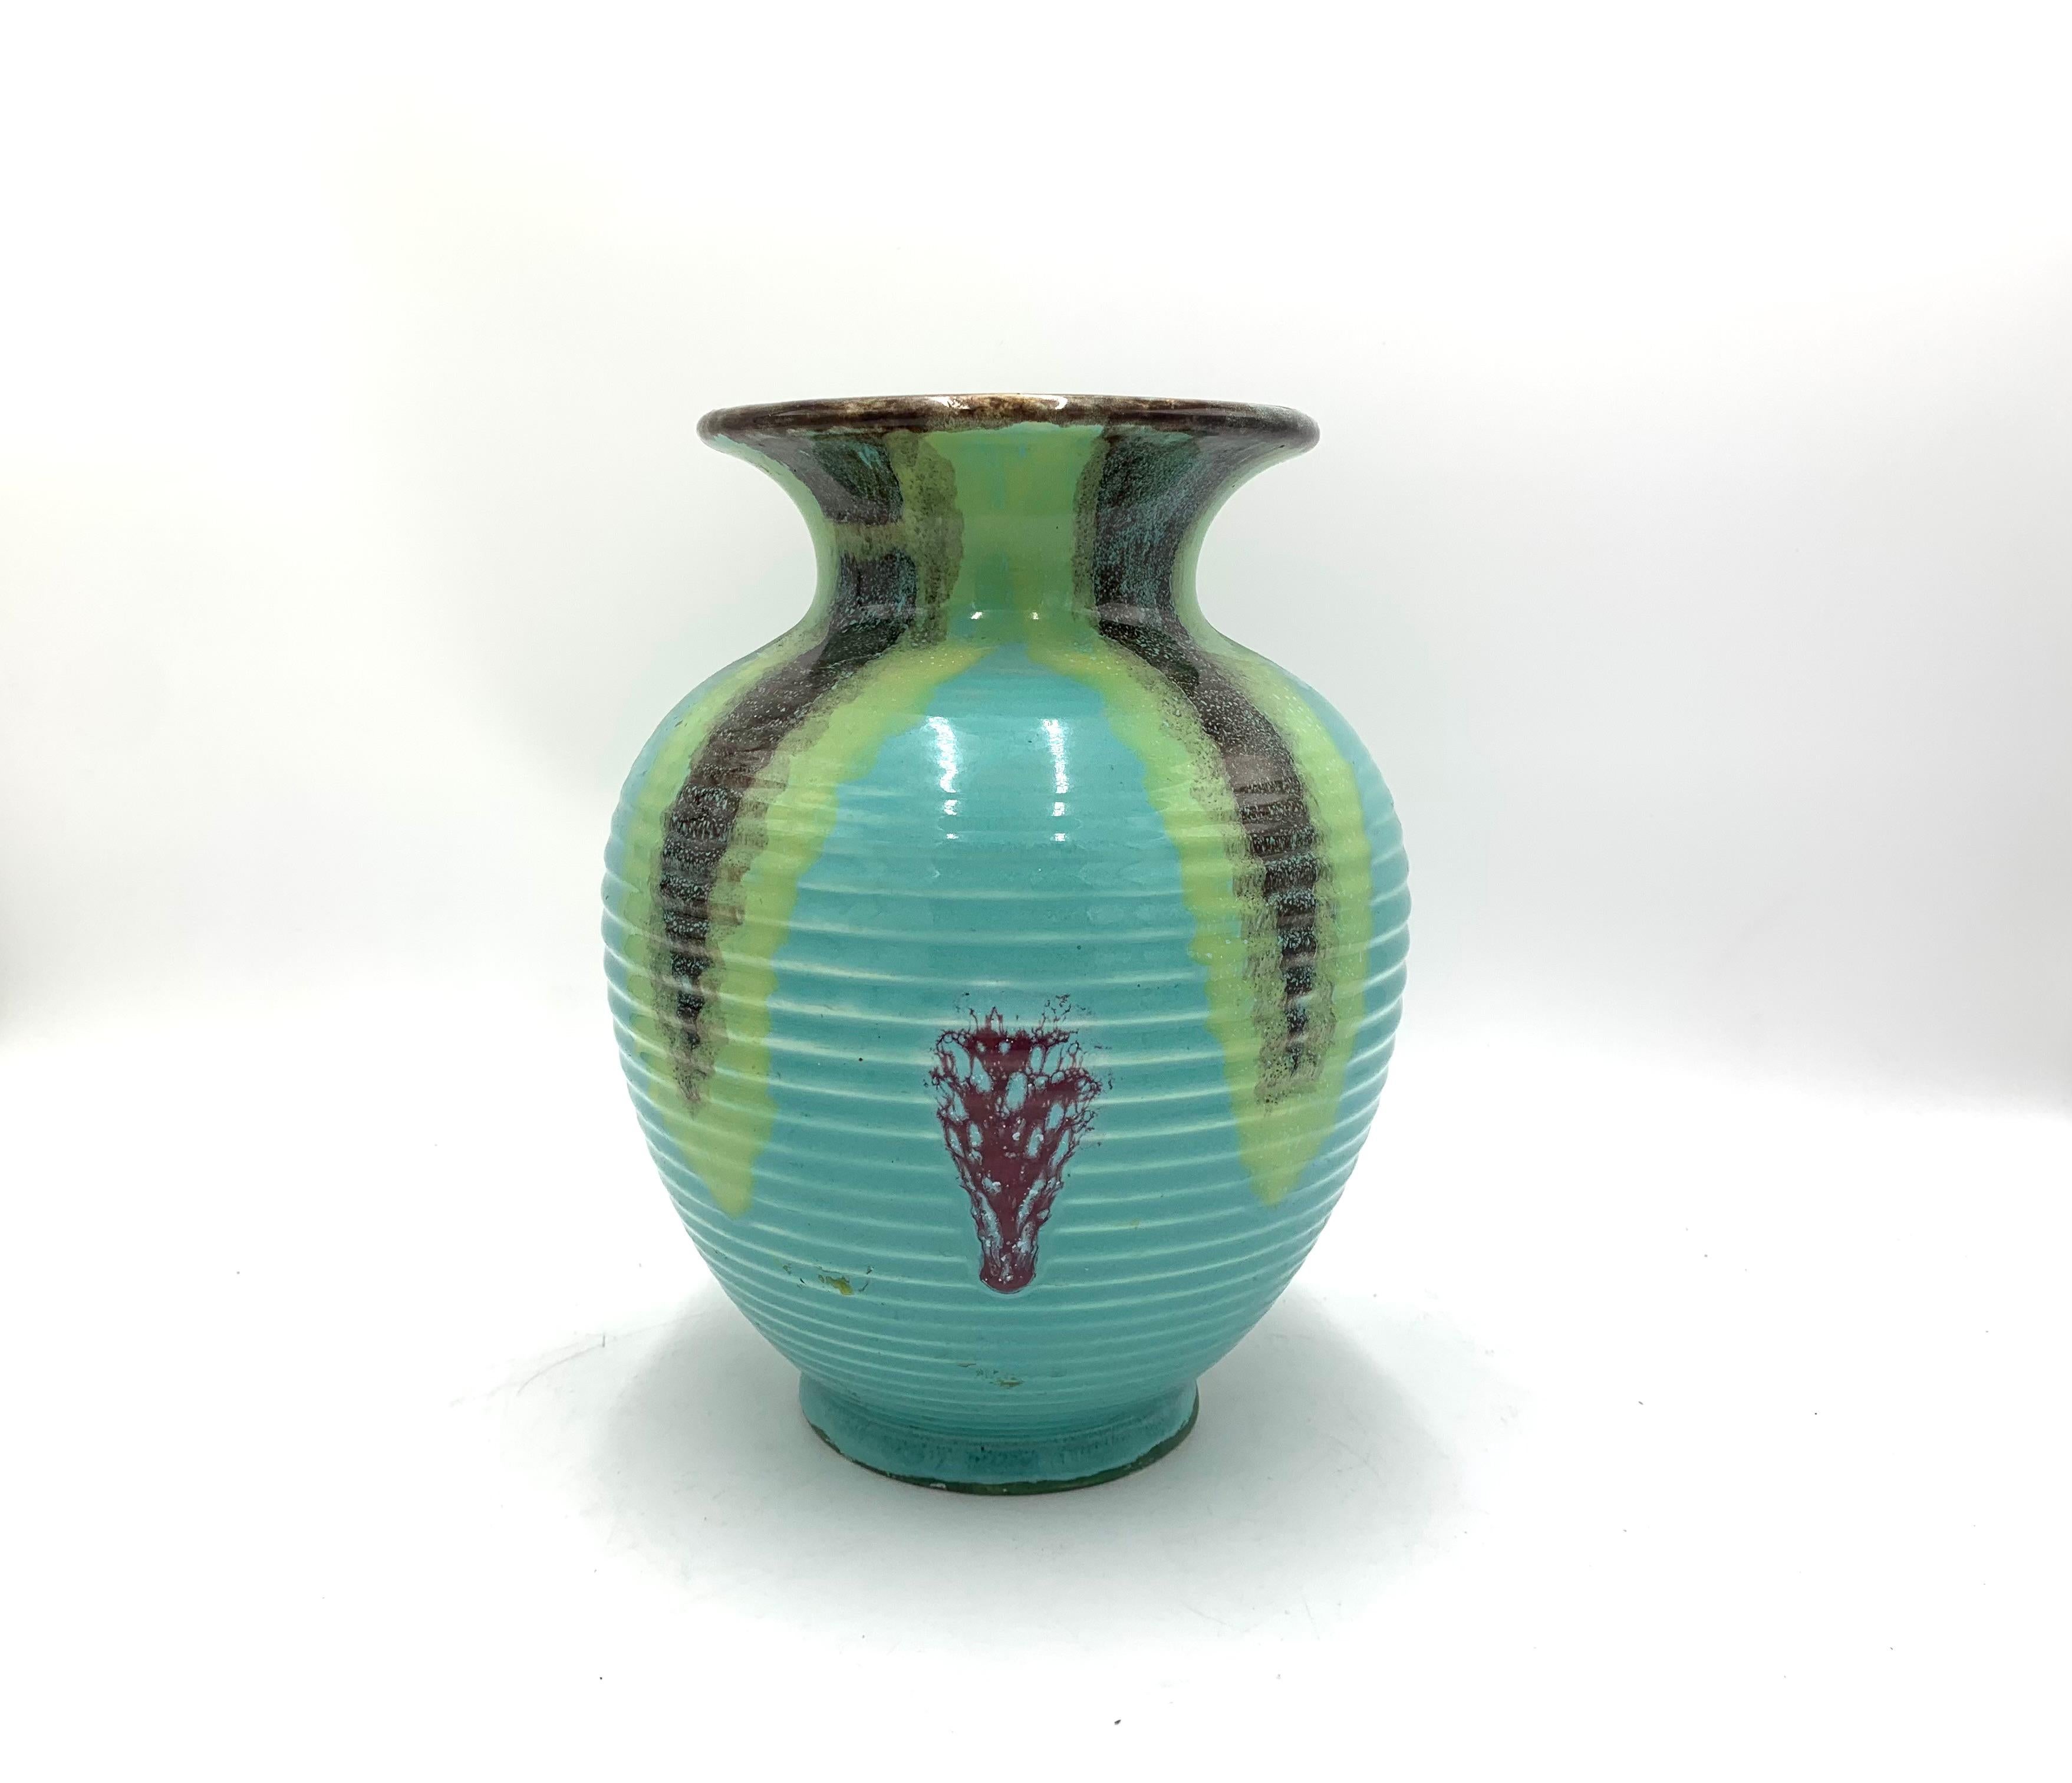 Tall turquoise ceramic vase

Produced in the 1960s in Czechoslovakia by Ditmar Urbach

Very good condition

Measures: height 28cm, diameter 22cm.